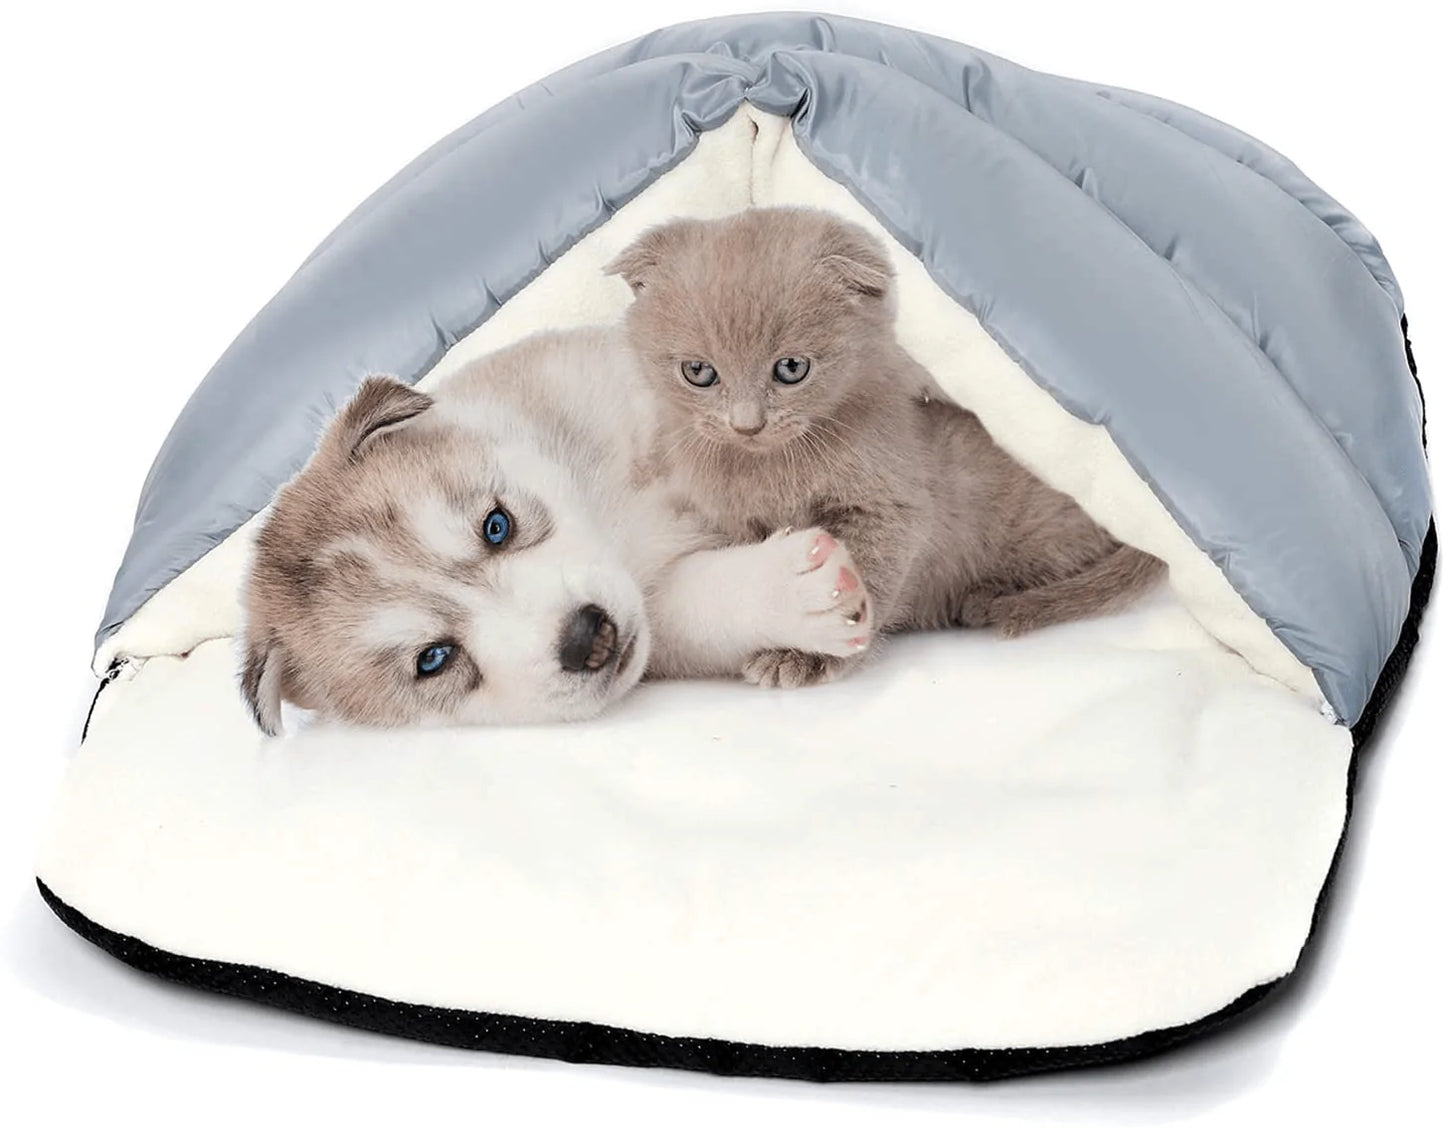 Yunnarl Ultra Soft Polar Fleece Dog Bed - Washable Pet House Cave Bed for Small Medium Dog Cat Waterproof Surface Bottom Dog Bed Cat Bed